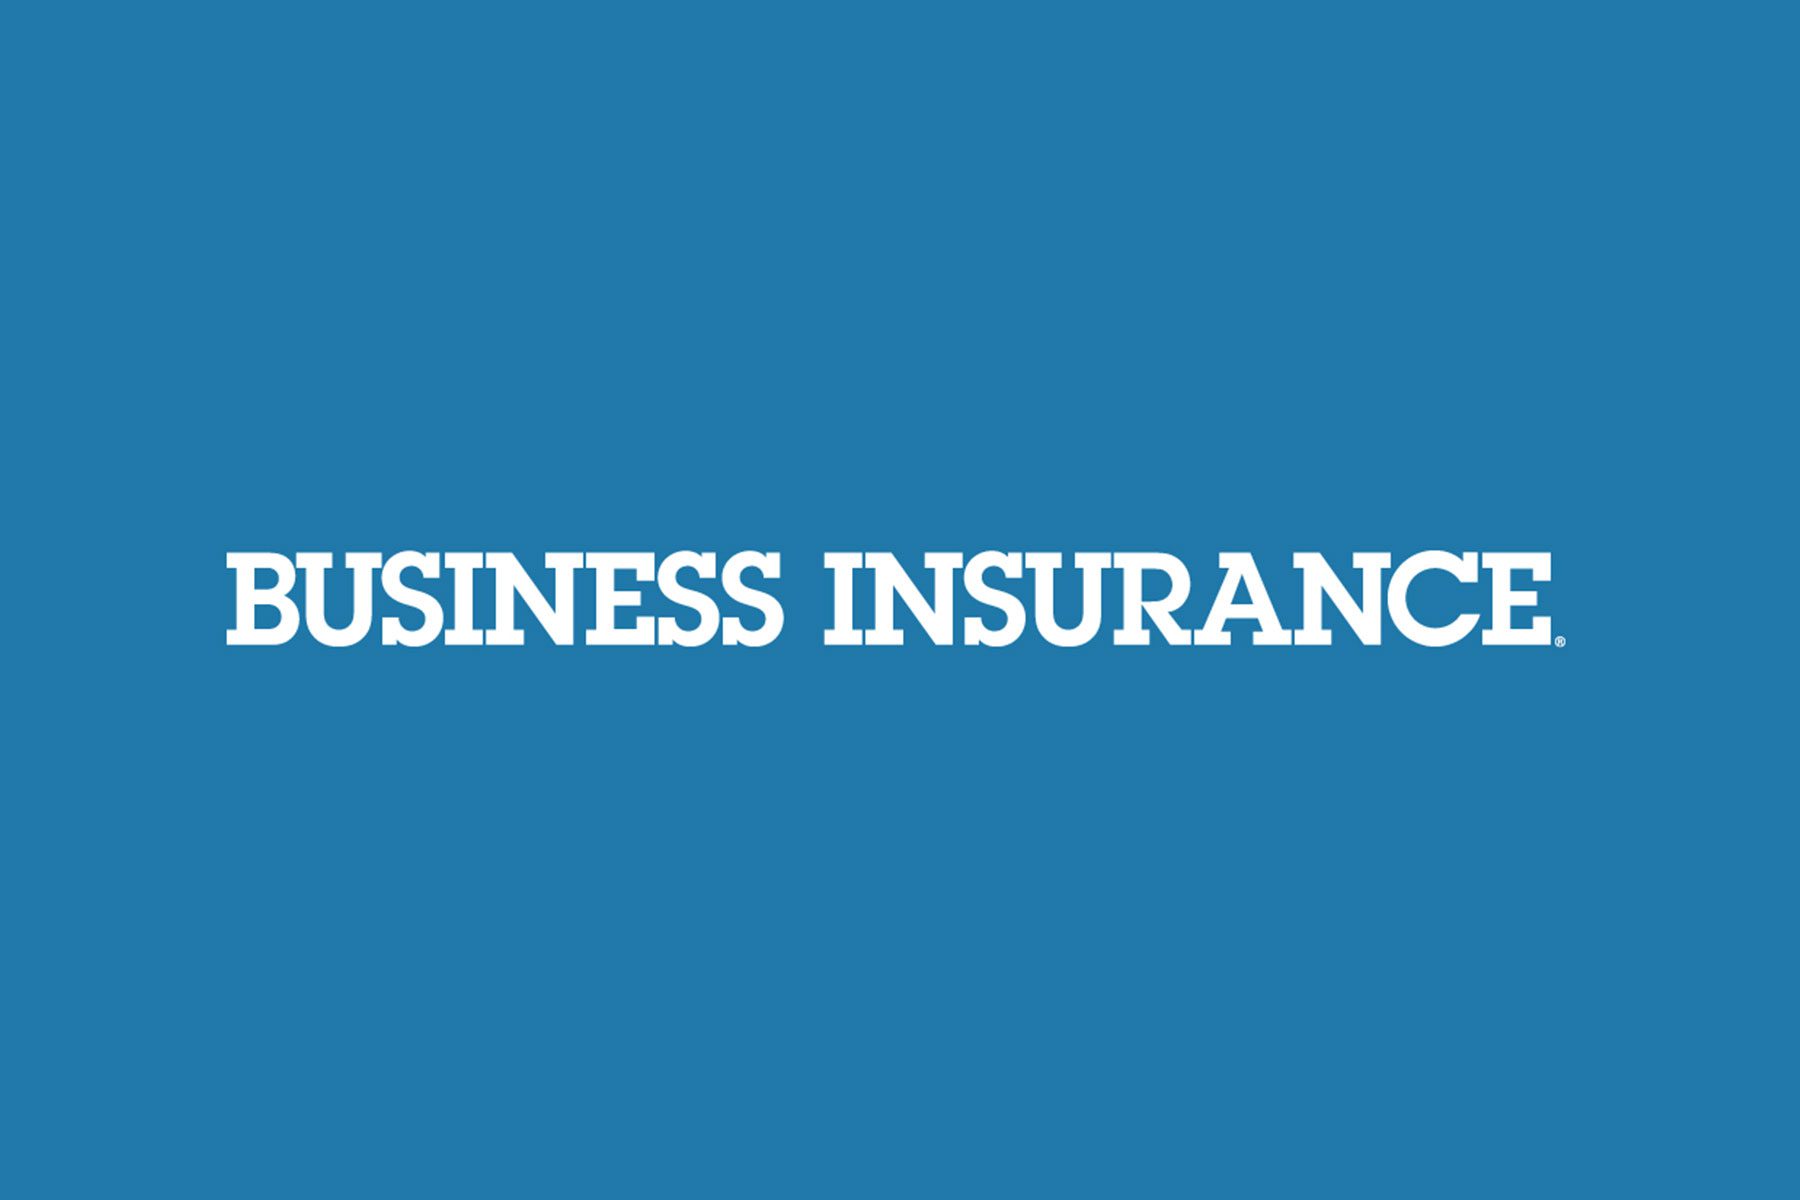 RBN Insurance Services Business Insurance - 2020 Best Places to Work in Insurance RBN BIZ INSURANCE LOGO